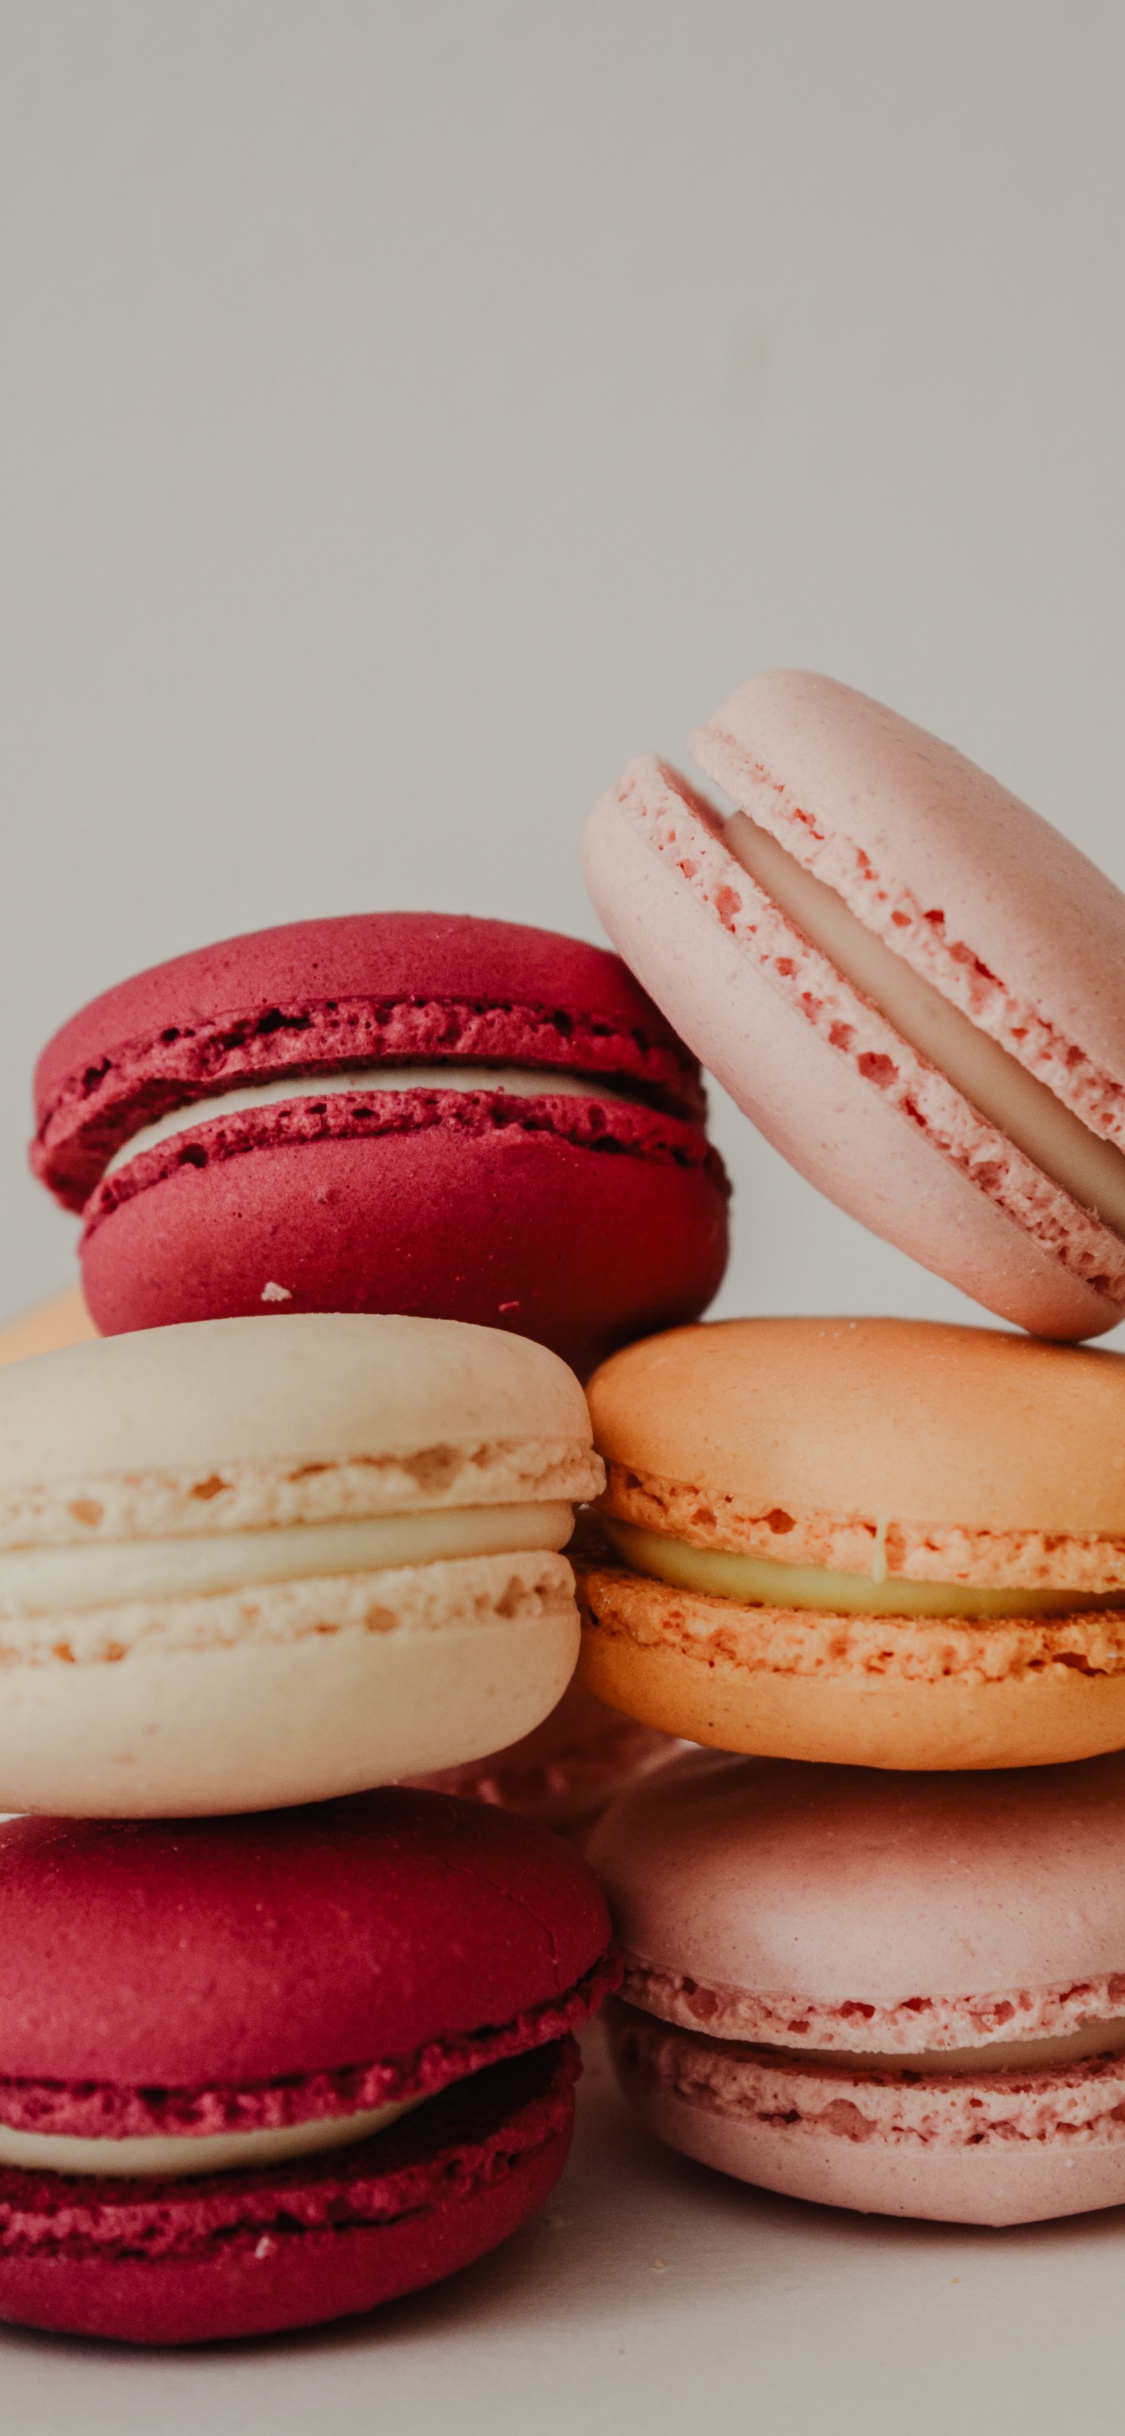 3 Pink and White Macaroons. Wallpaper in 1125x2436 Resolution